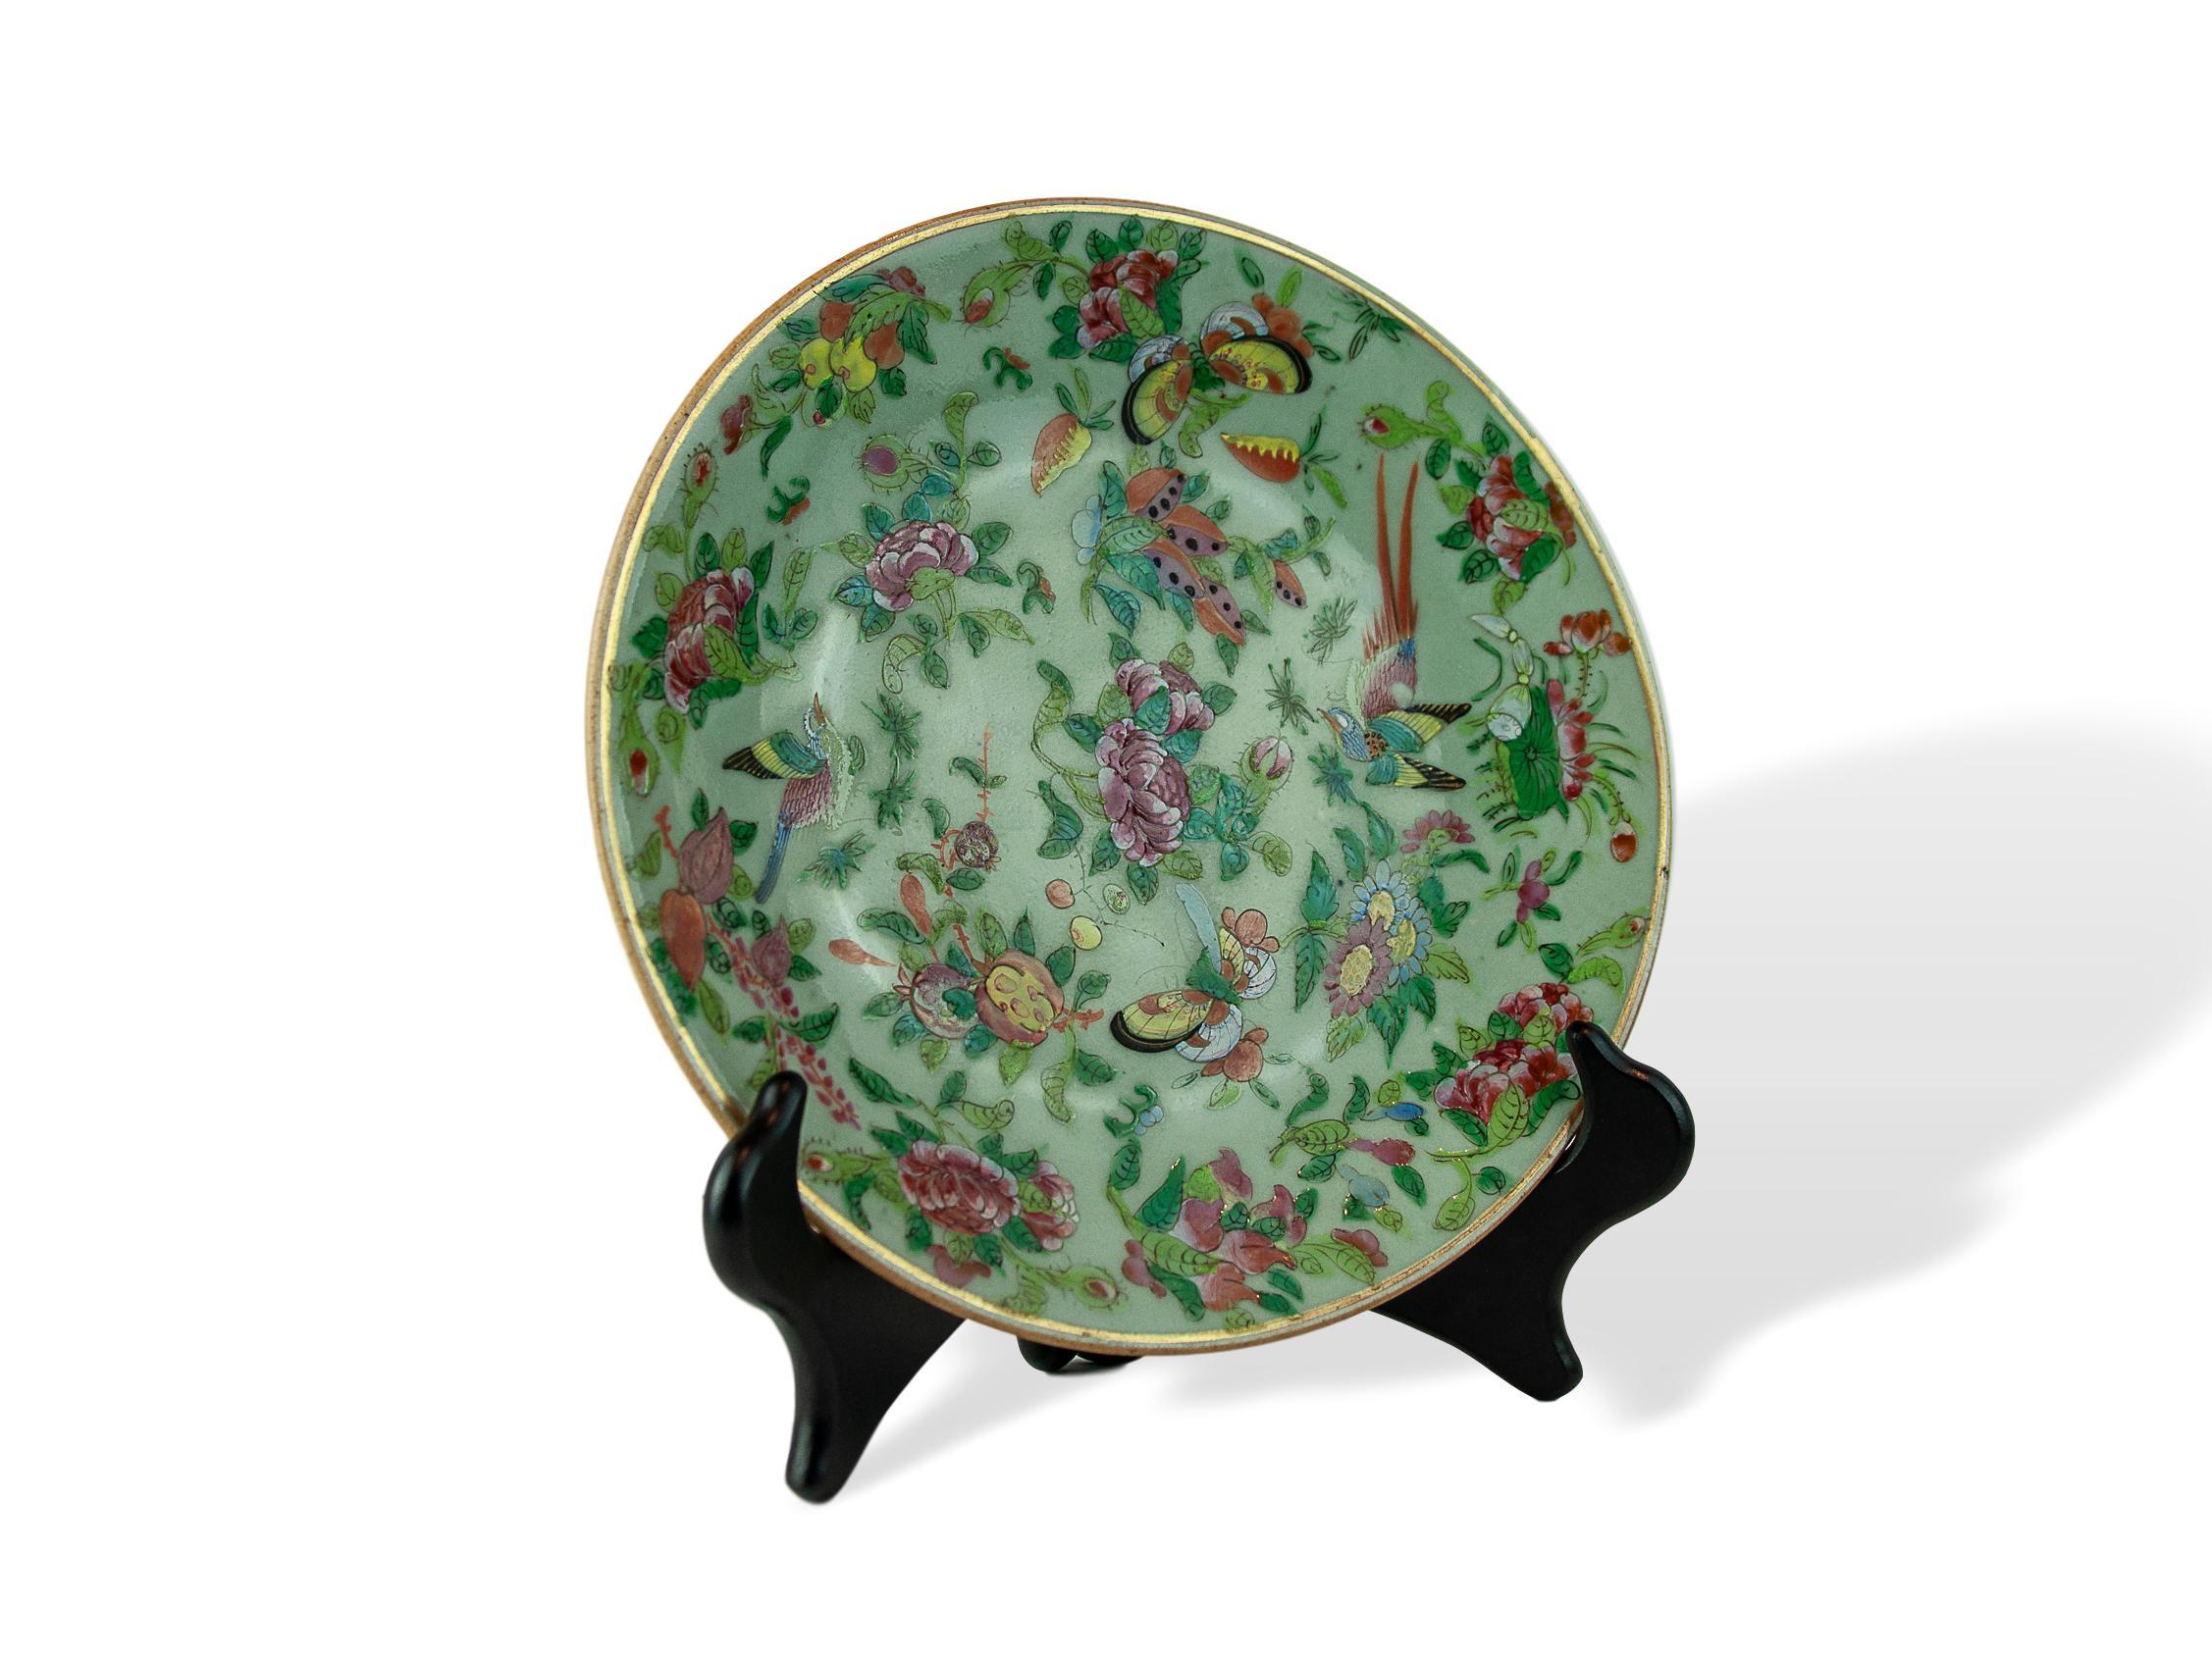 Chinese celadon Famille rose 9.75 inch plate, Canton, circa 1820, enameled with stylized pheasants, floral and fruit sprays, and carrots (rare), reserved on a celadon ground. Underglaze-blue seal mark.